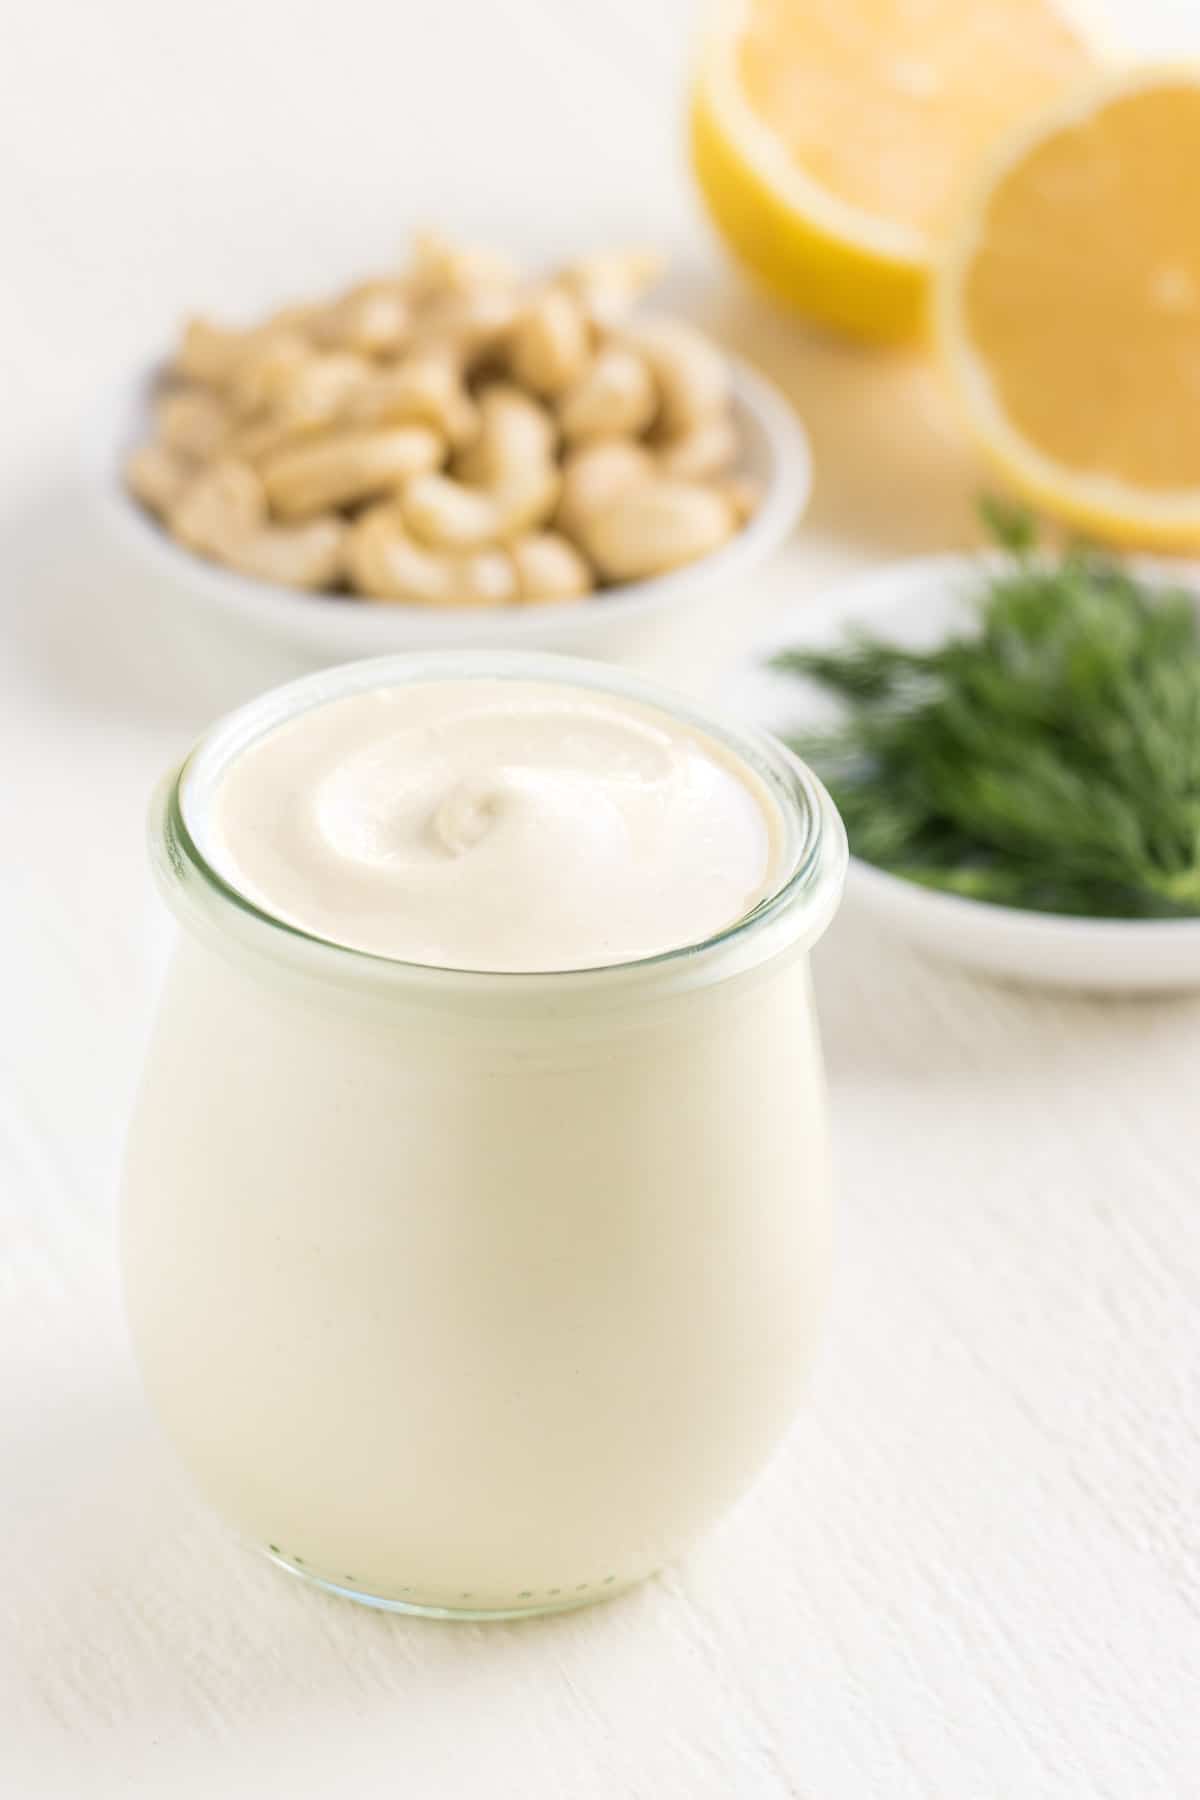 vegan cashew sour cream inside a glass jar surrounded by dill, lemon, and cashews